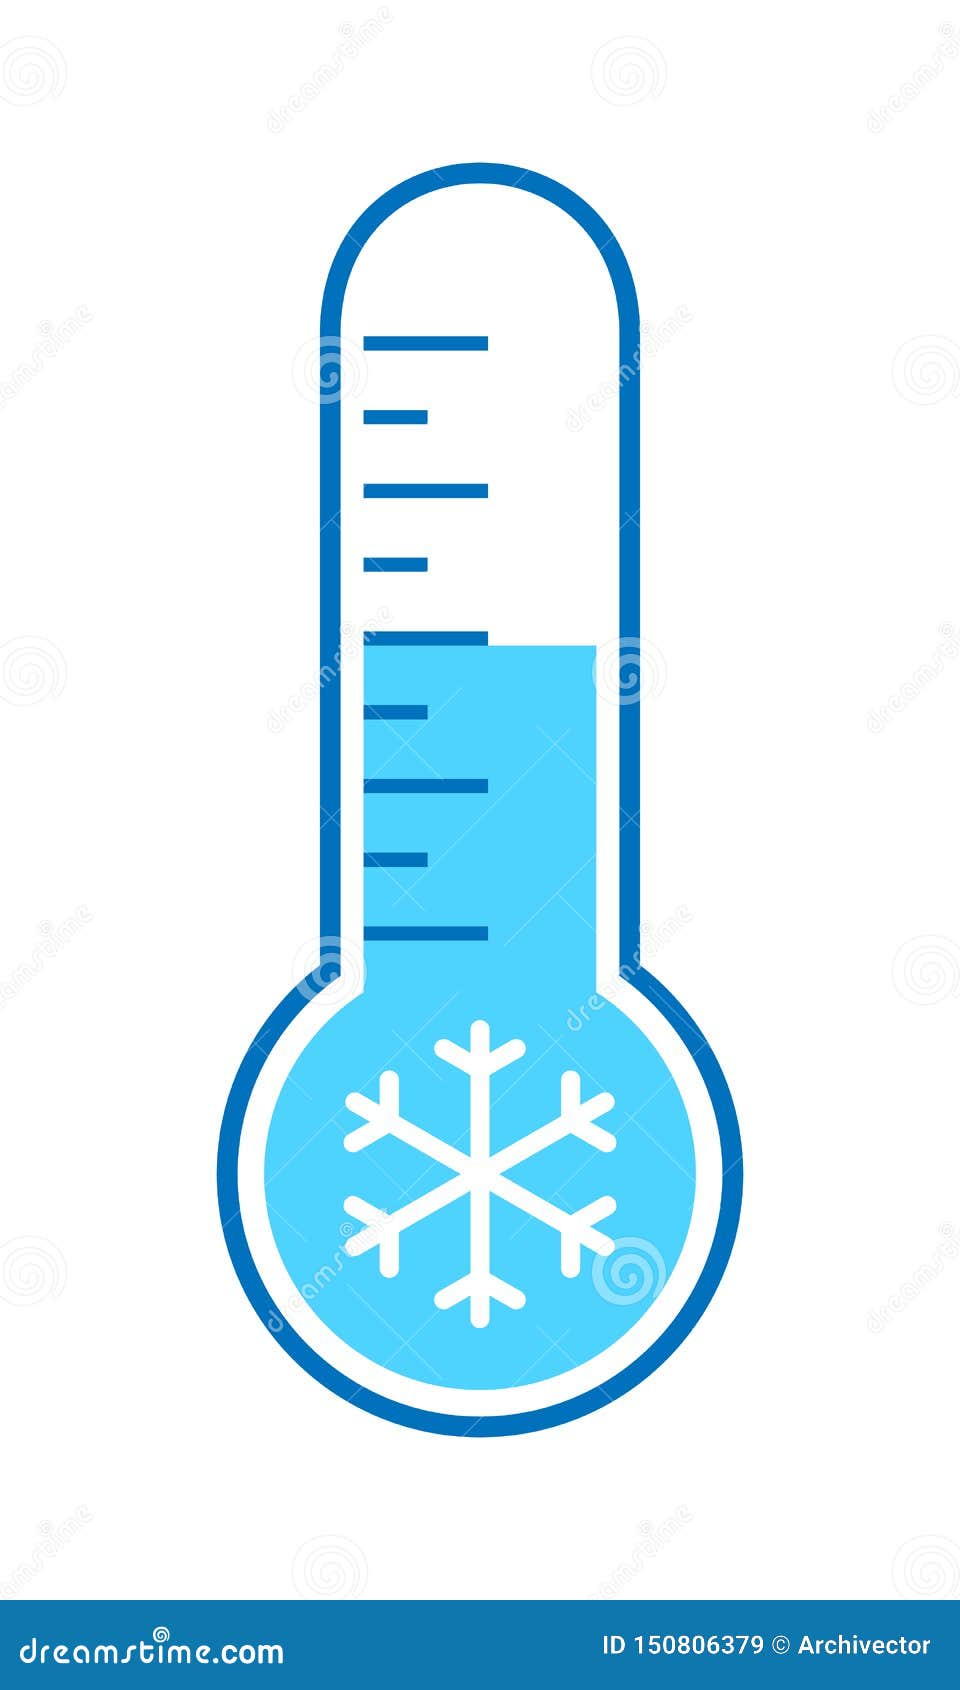 https://thumbs.dreamstime.com/z/cold-cold-weather-symbol-thermometer-low-temperature-sign-isolated-white-background-icon-flat-design-website-app-150806379.jpg